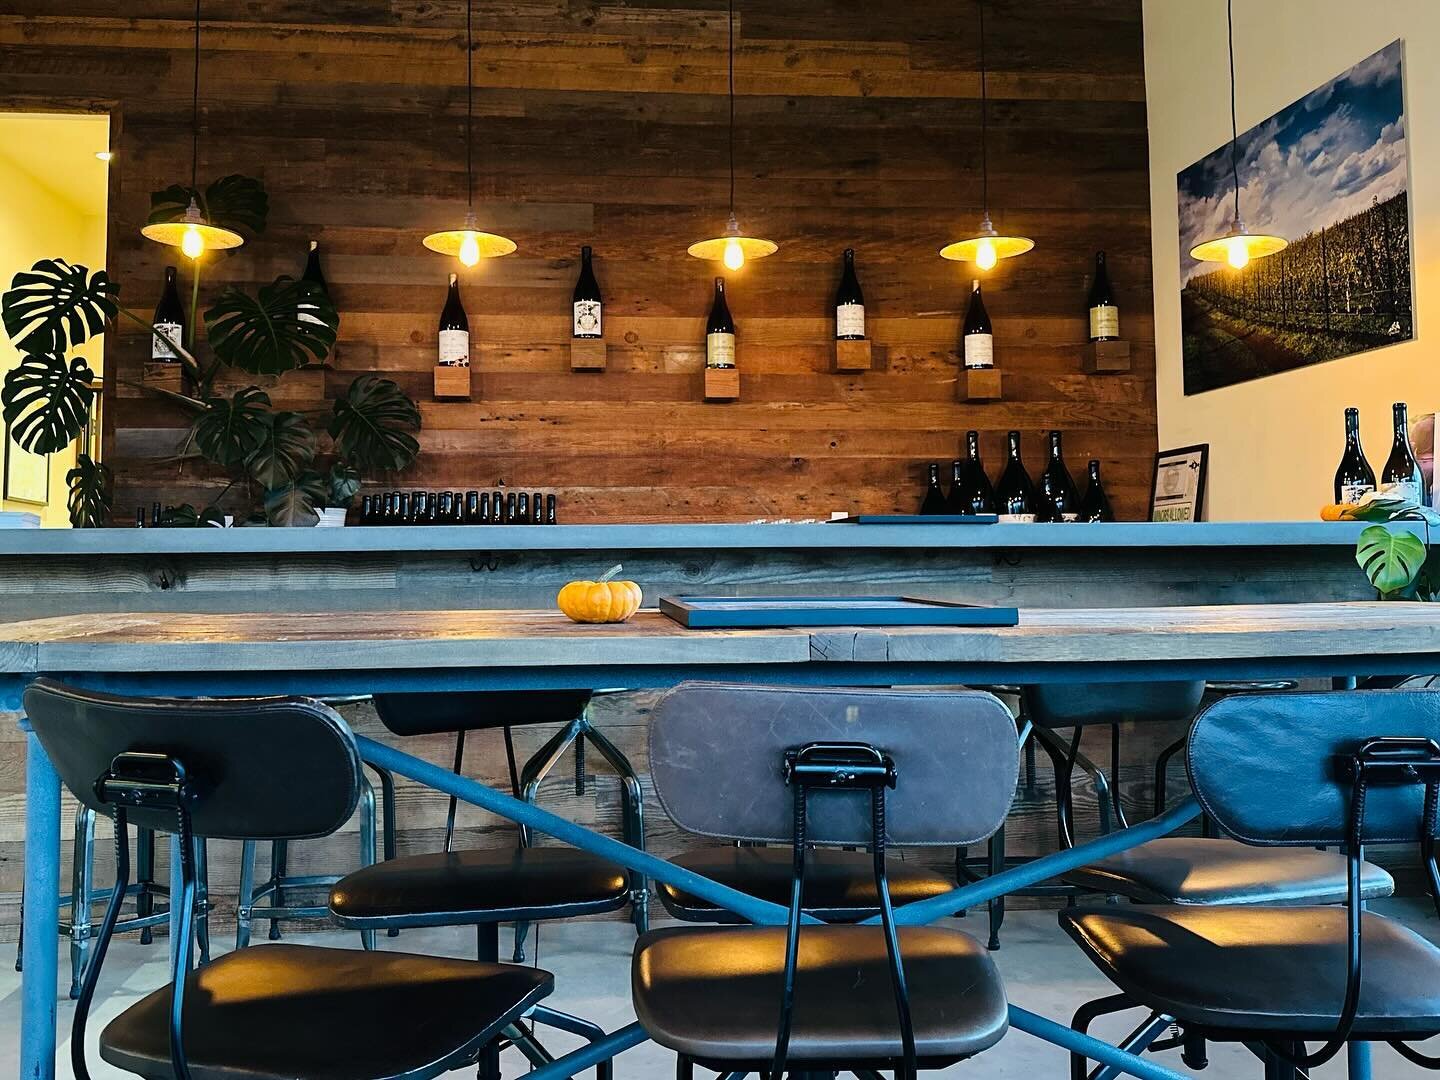 Come get cozy in our laid back downtown tasting room and taste through our extraordinary wines. 
#deckthehills #dundeehills #extraordinary #yum #holidays #chill #chillvibes #Tastywines #pinot #chardonnay #oregon #tasting #tastingroom #winetasting #wi